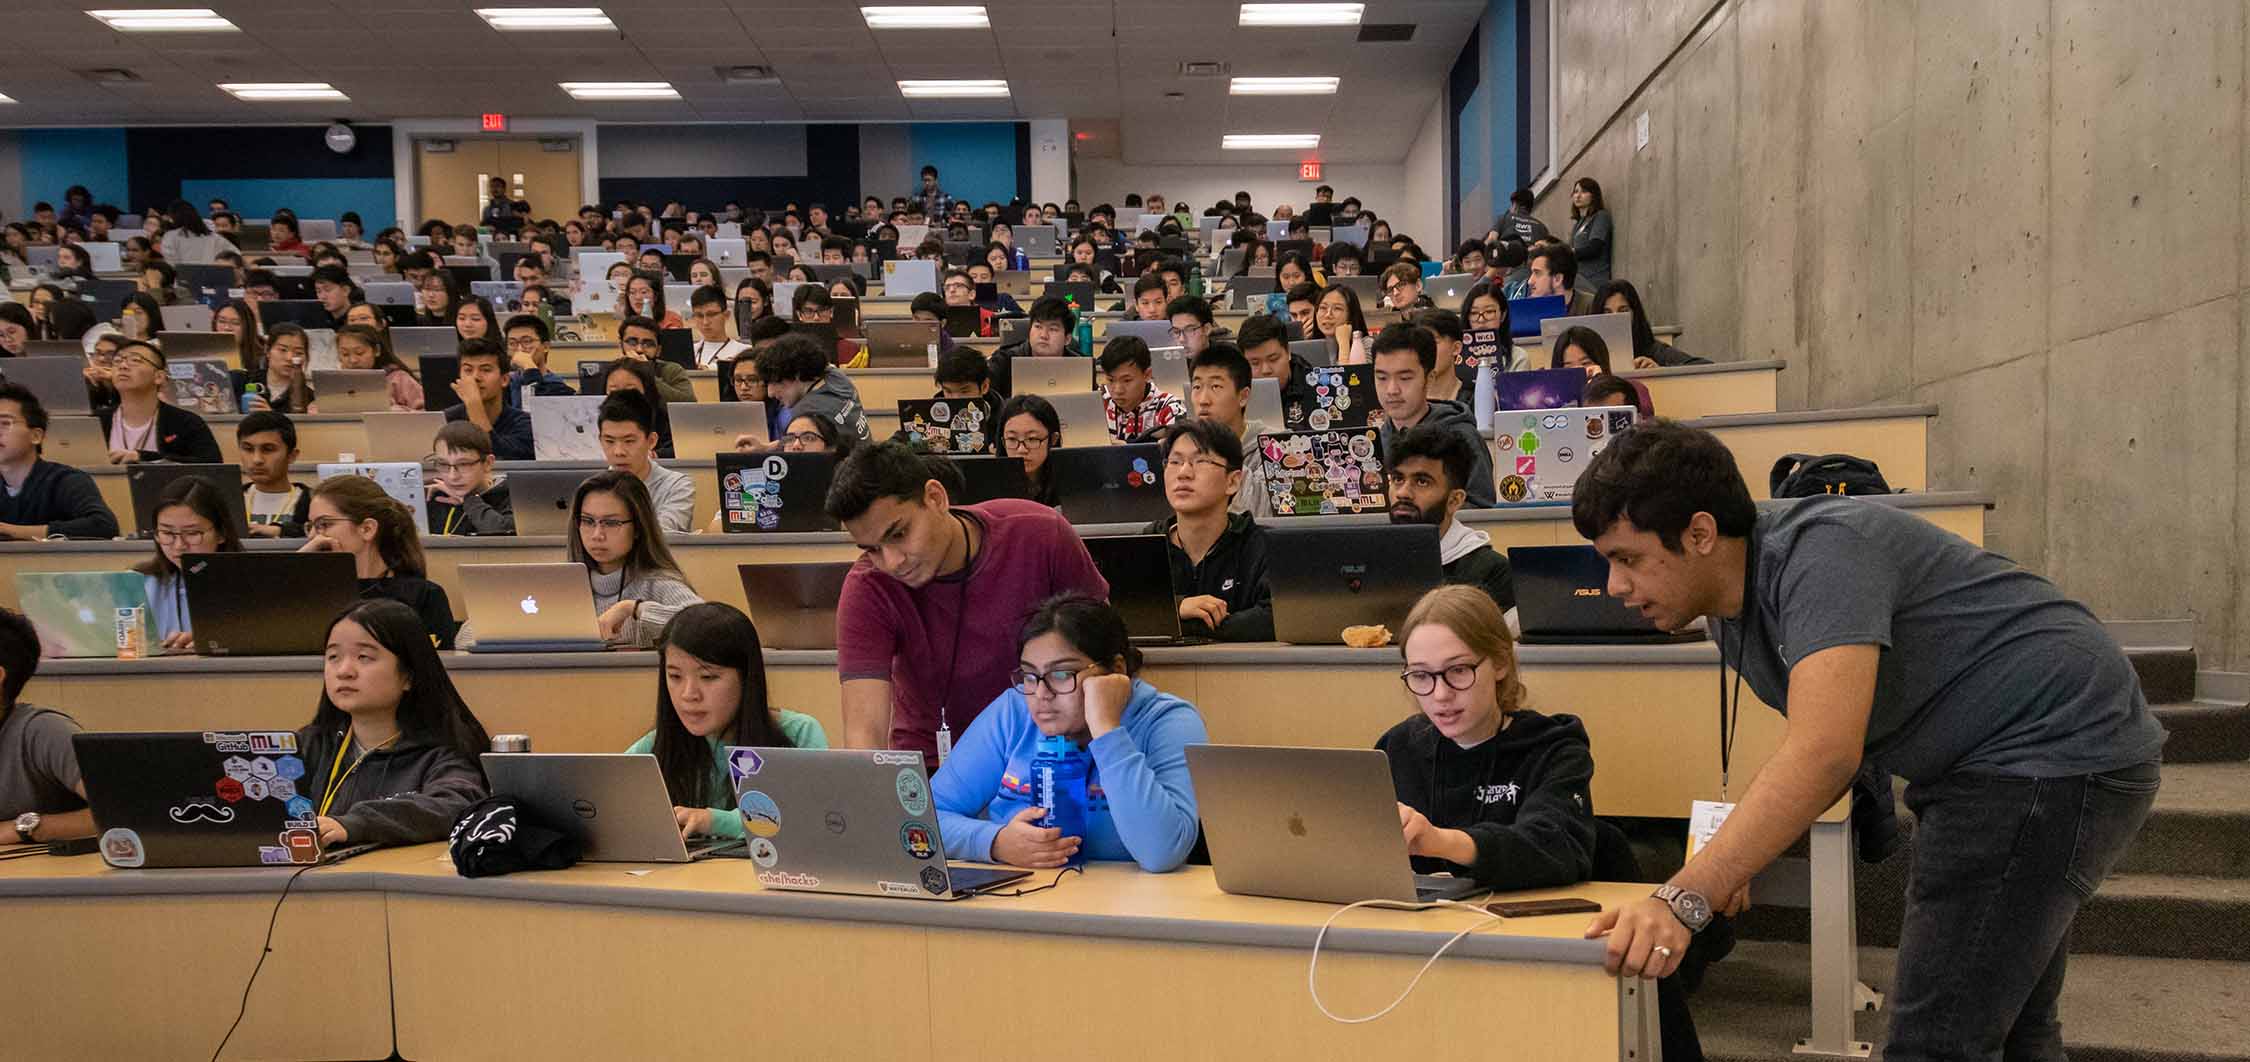 A group of students participate in a Hackathon